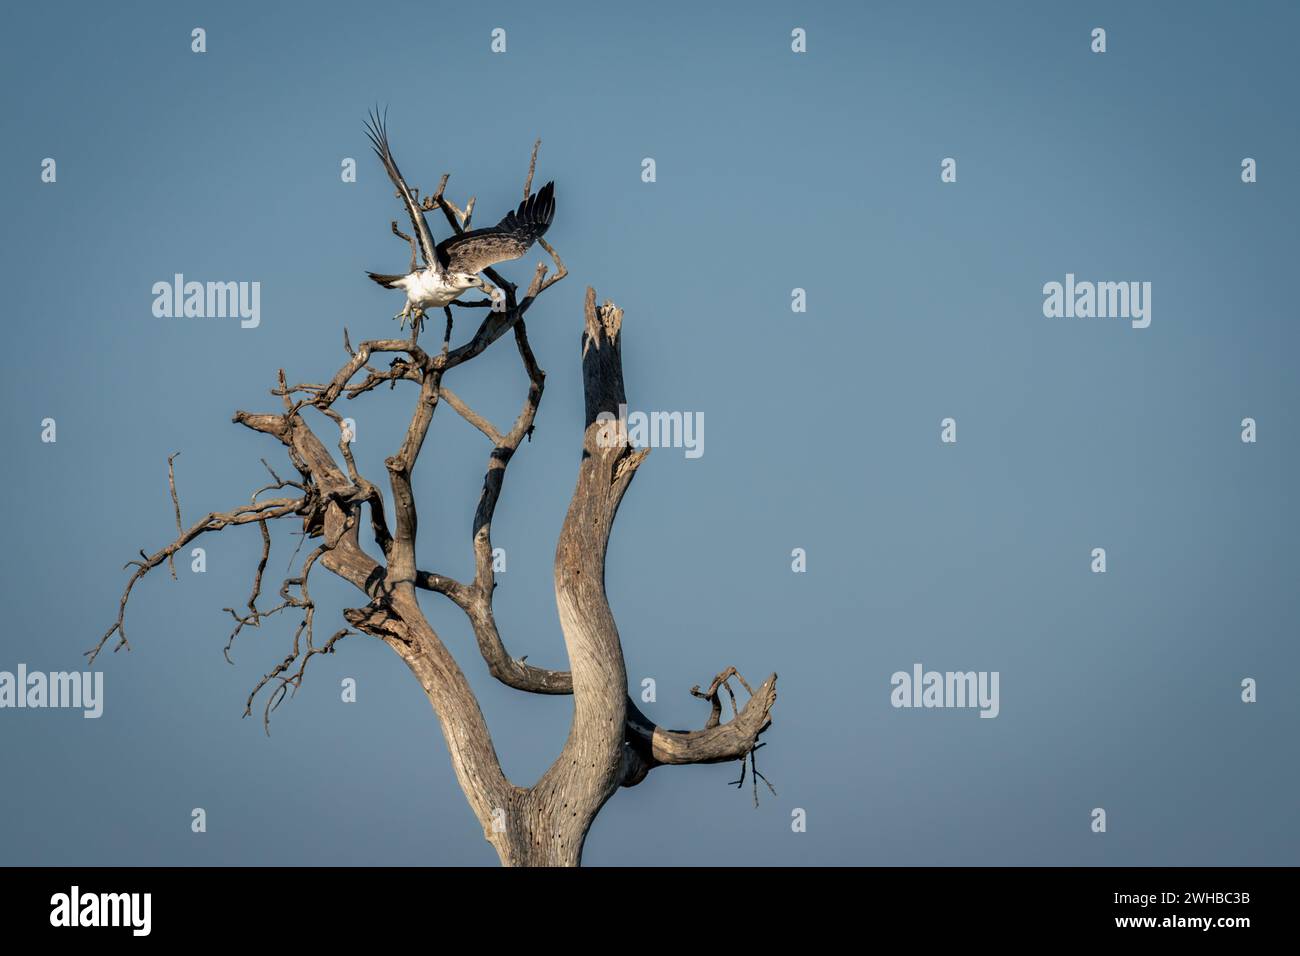 Juvenile martial eagle taking off from tree Stock Photo